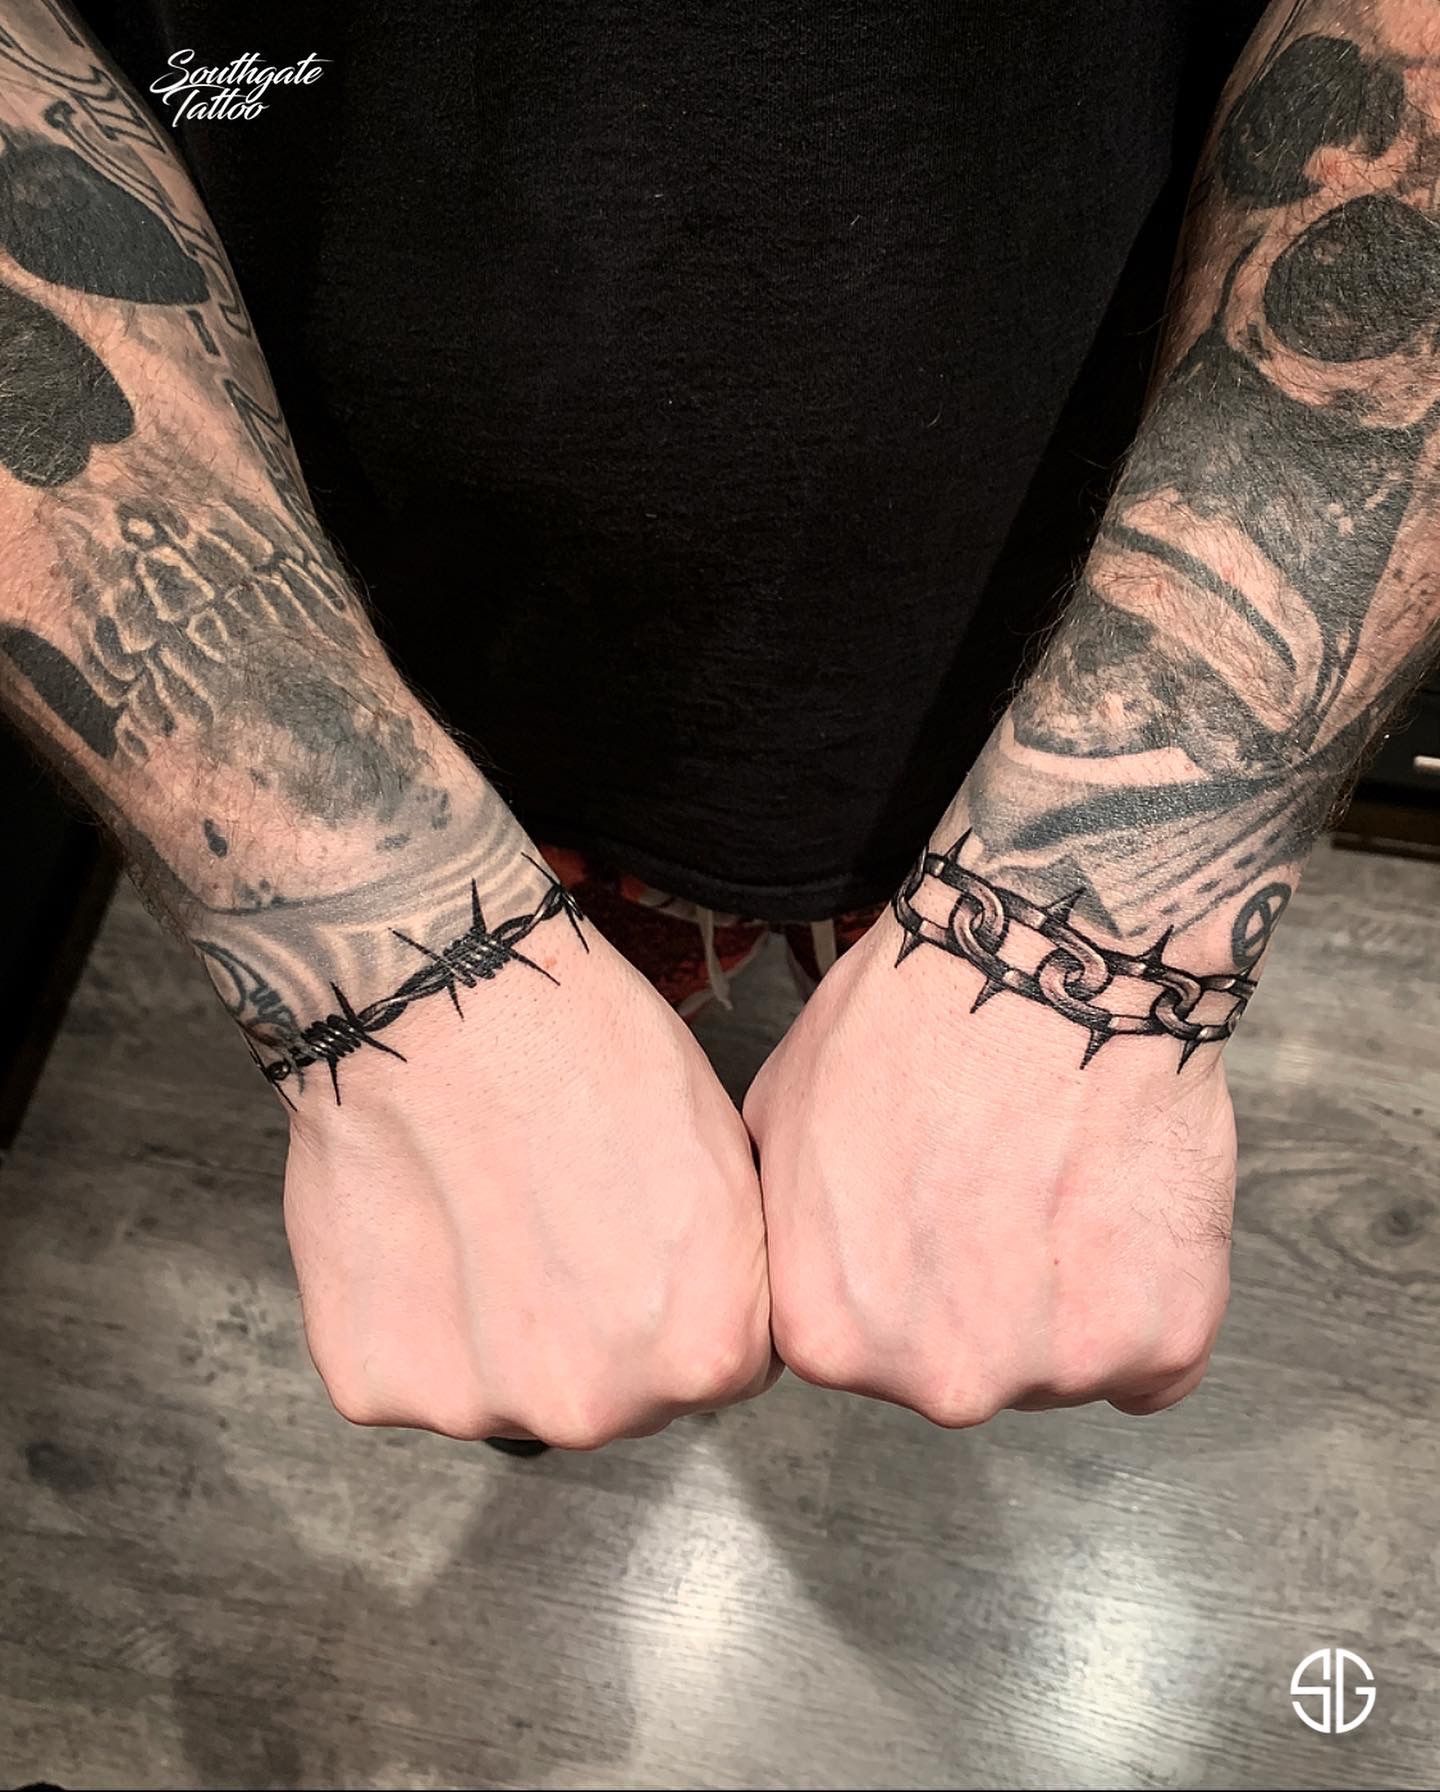 Tattoo uploaded by Southgate SG Tattoo & Piercing Studio • • ⛓• broken barbed  wire and chain bands by our resident @ for @viktor_hook  completion of two sleeves. 🥳Healed clown and skull